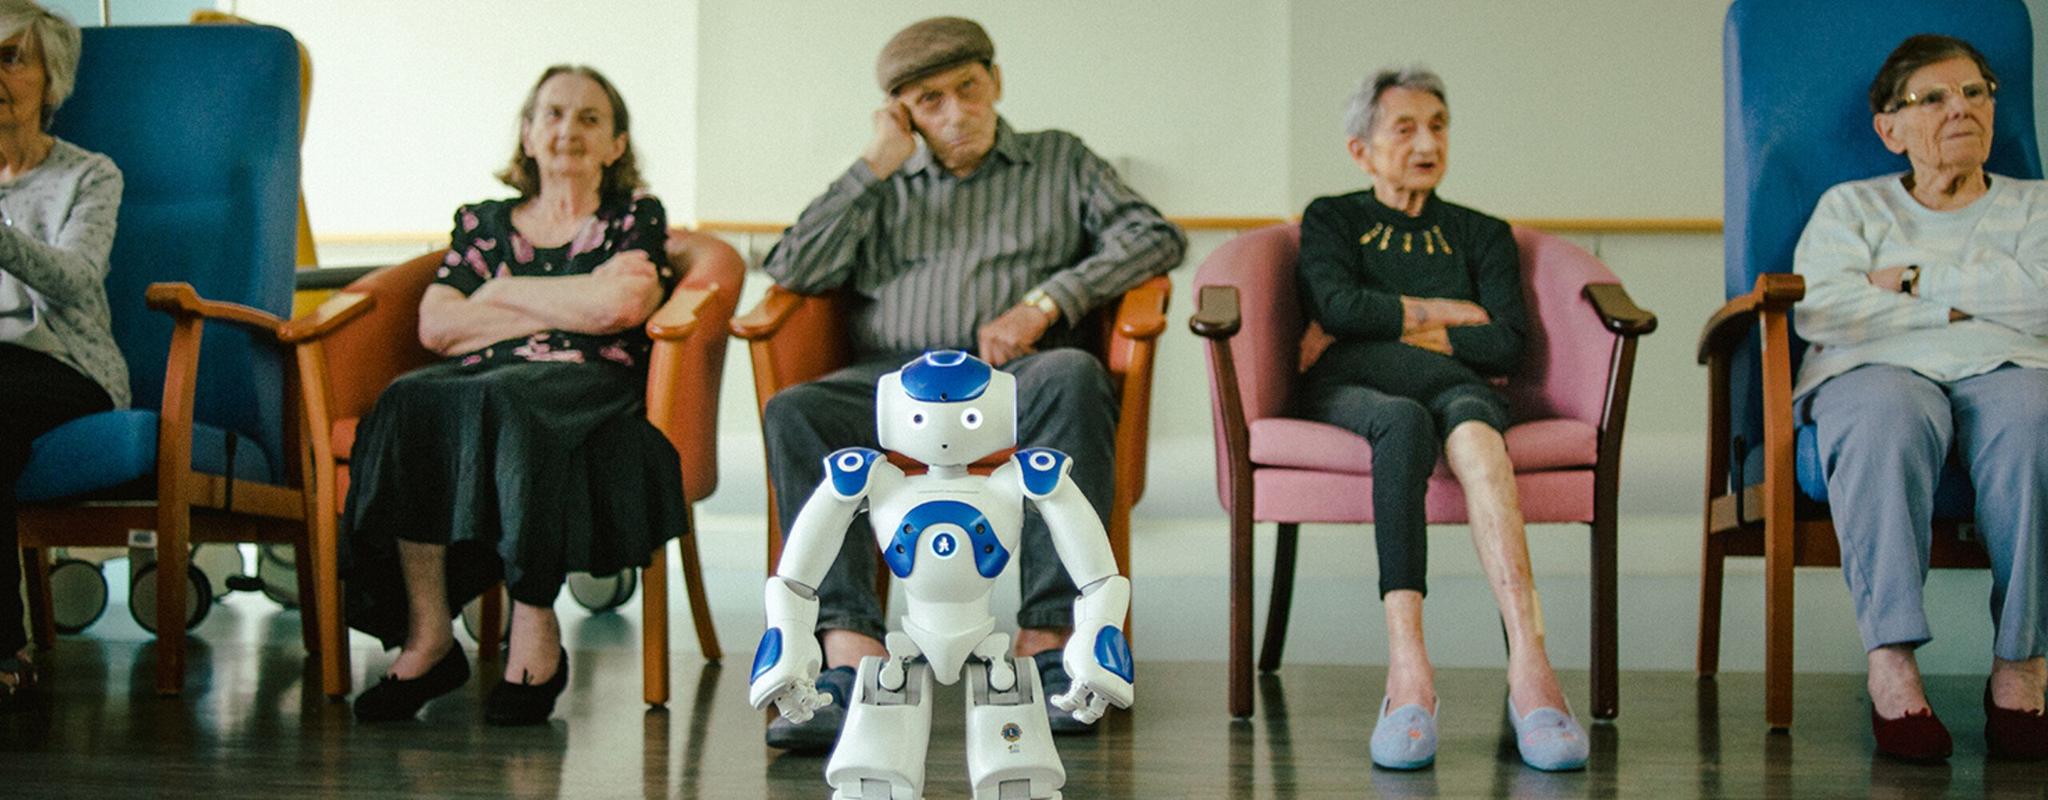 Zora the Robot Care-Giver helps people with communication and provides comfort and entertainment in a healthcare setting in France